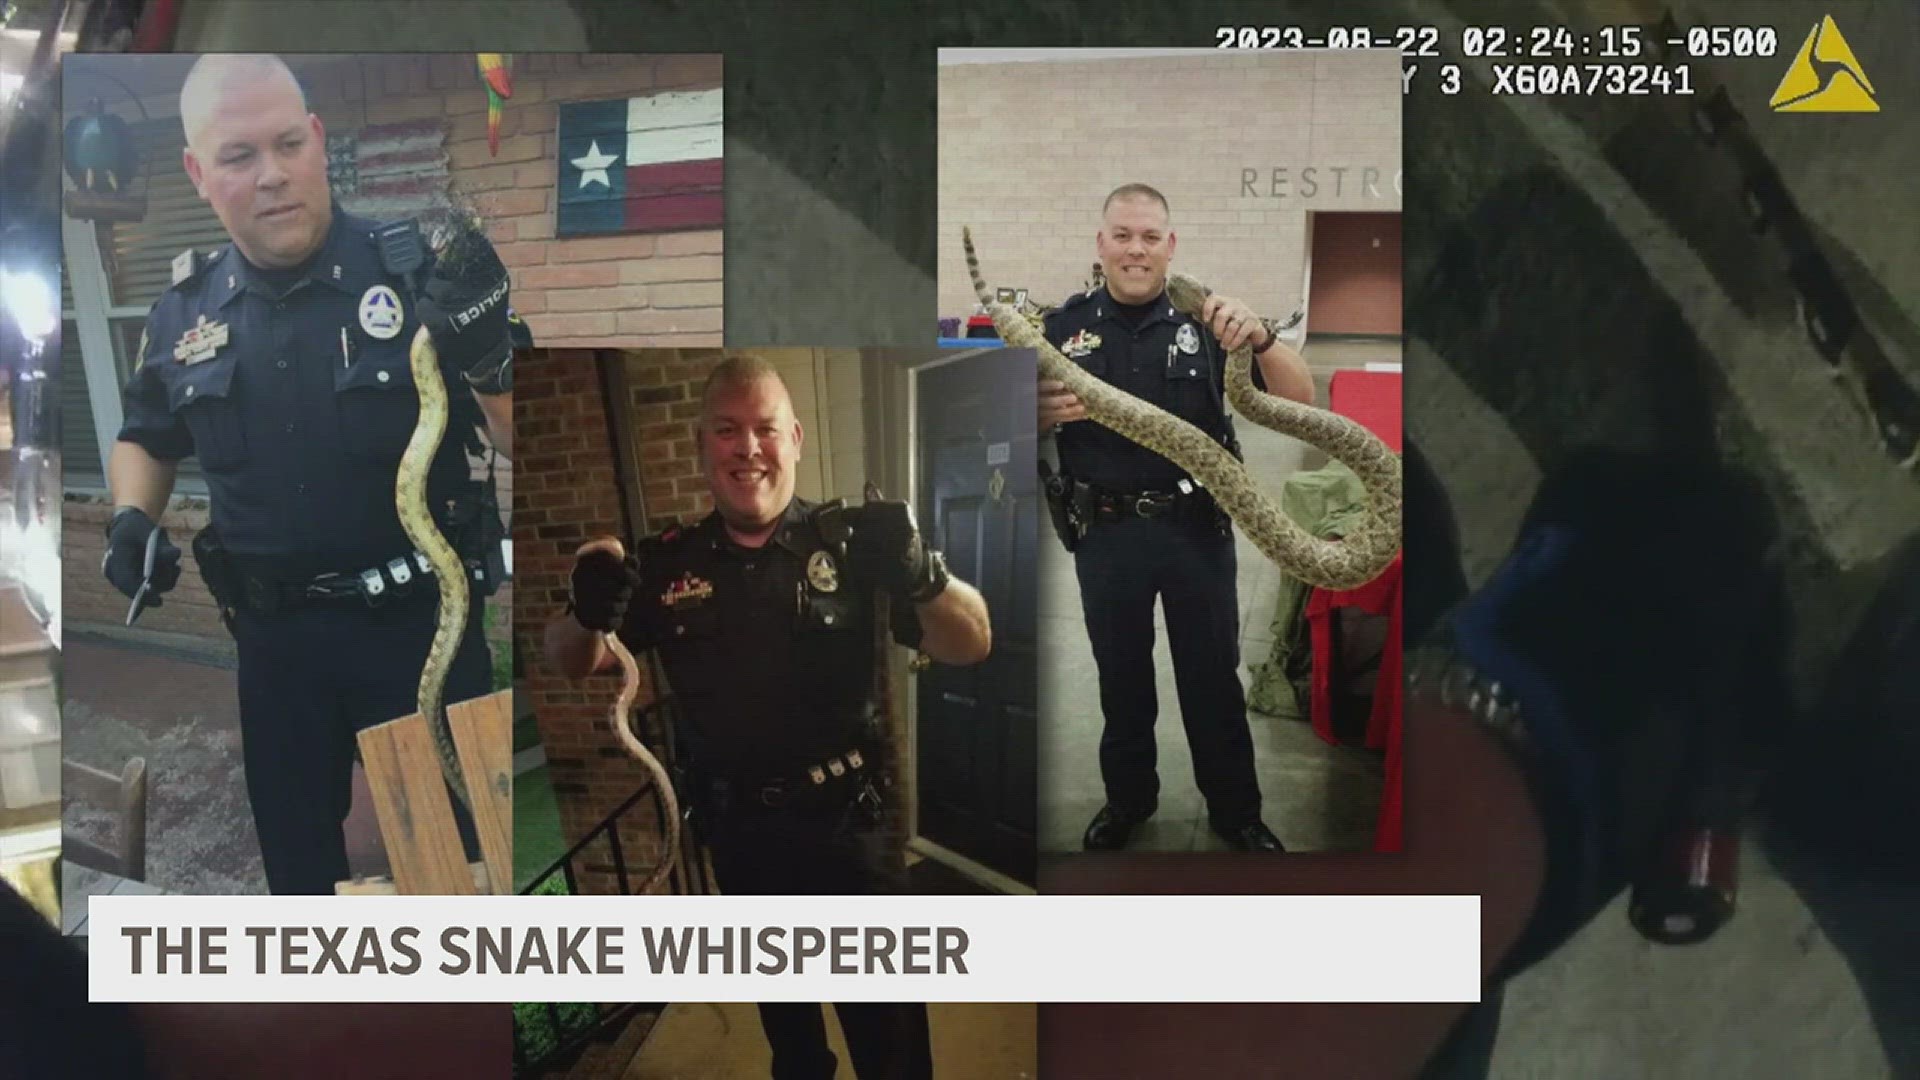 Texas officer Stephen Burres is known by many nicknames in the department, and professional snake whisperer is one of them.